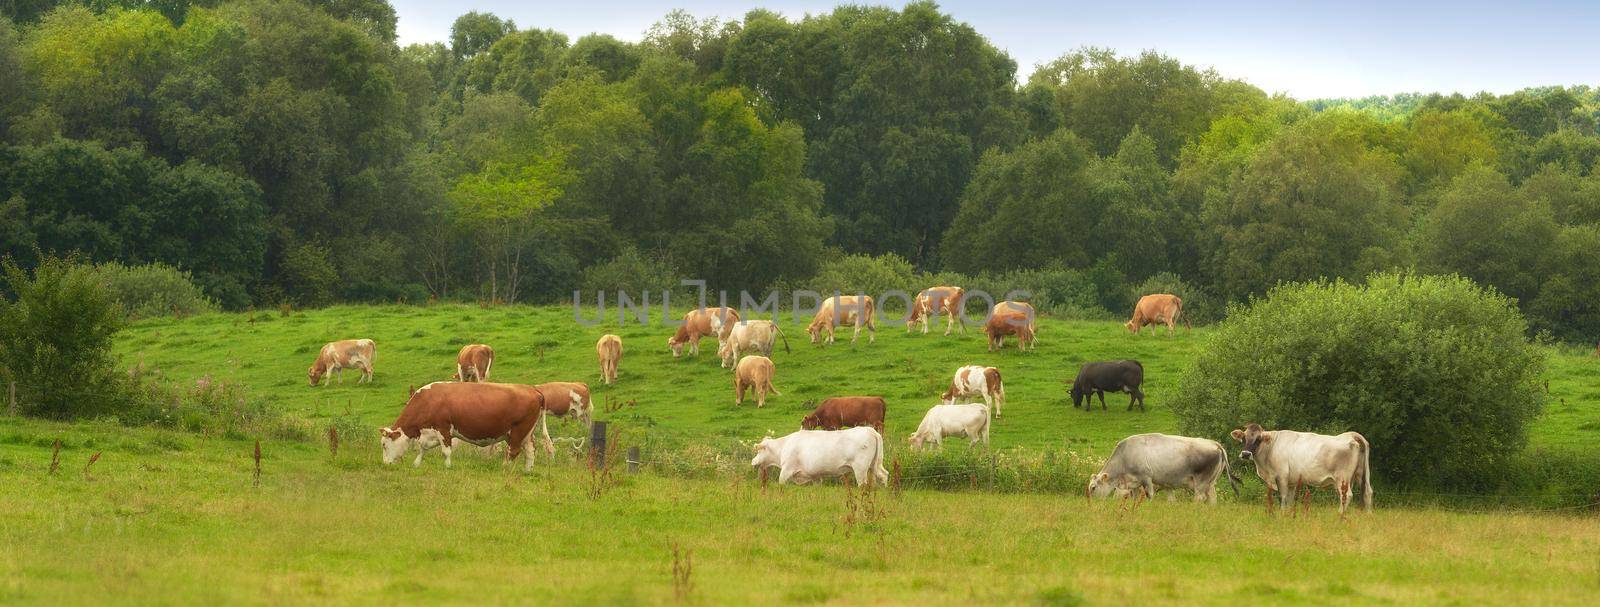 Herd of cows eating grass on a field in the rural countryside. Lush landscape with cattle animals grazing on a pasture in nature. Raising and breeding livestock on a ranch for beef and dairy industry.